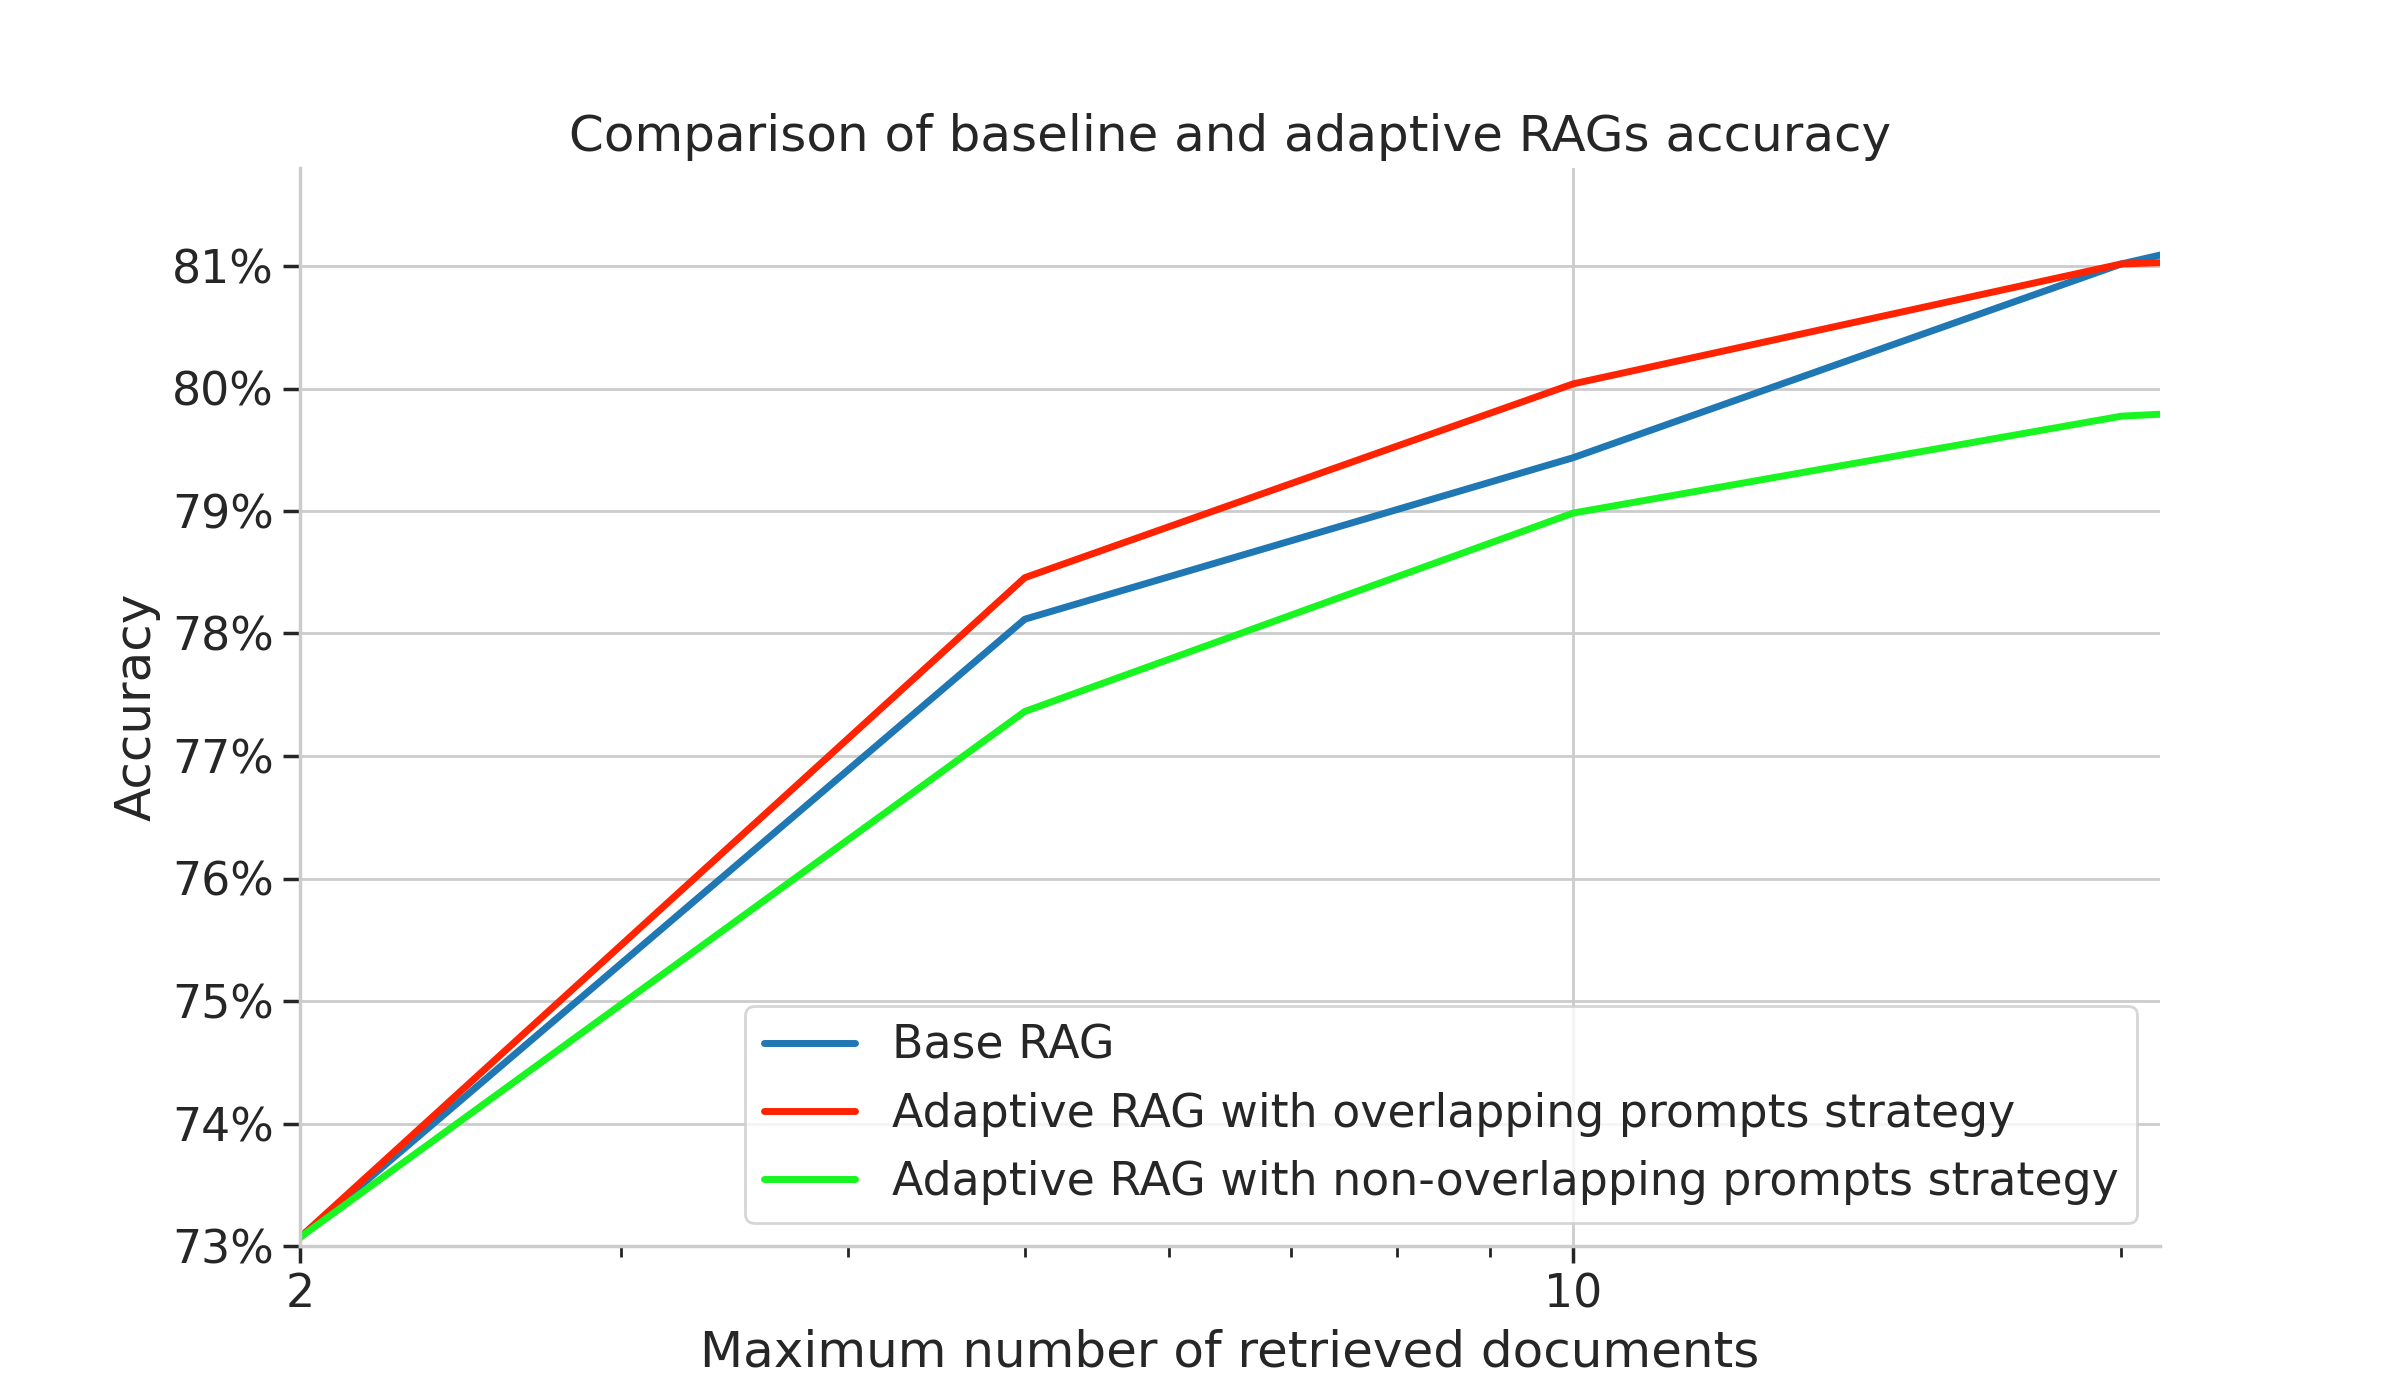 Comparison of accuracy of Adaptive RAG and Base RAG